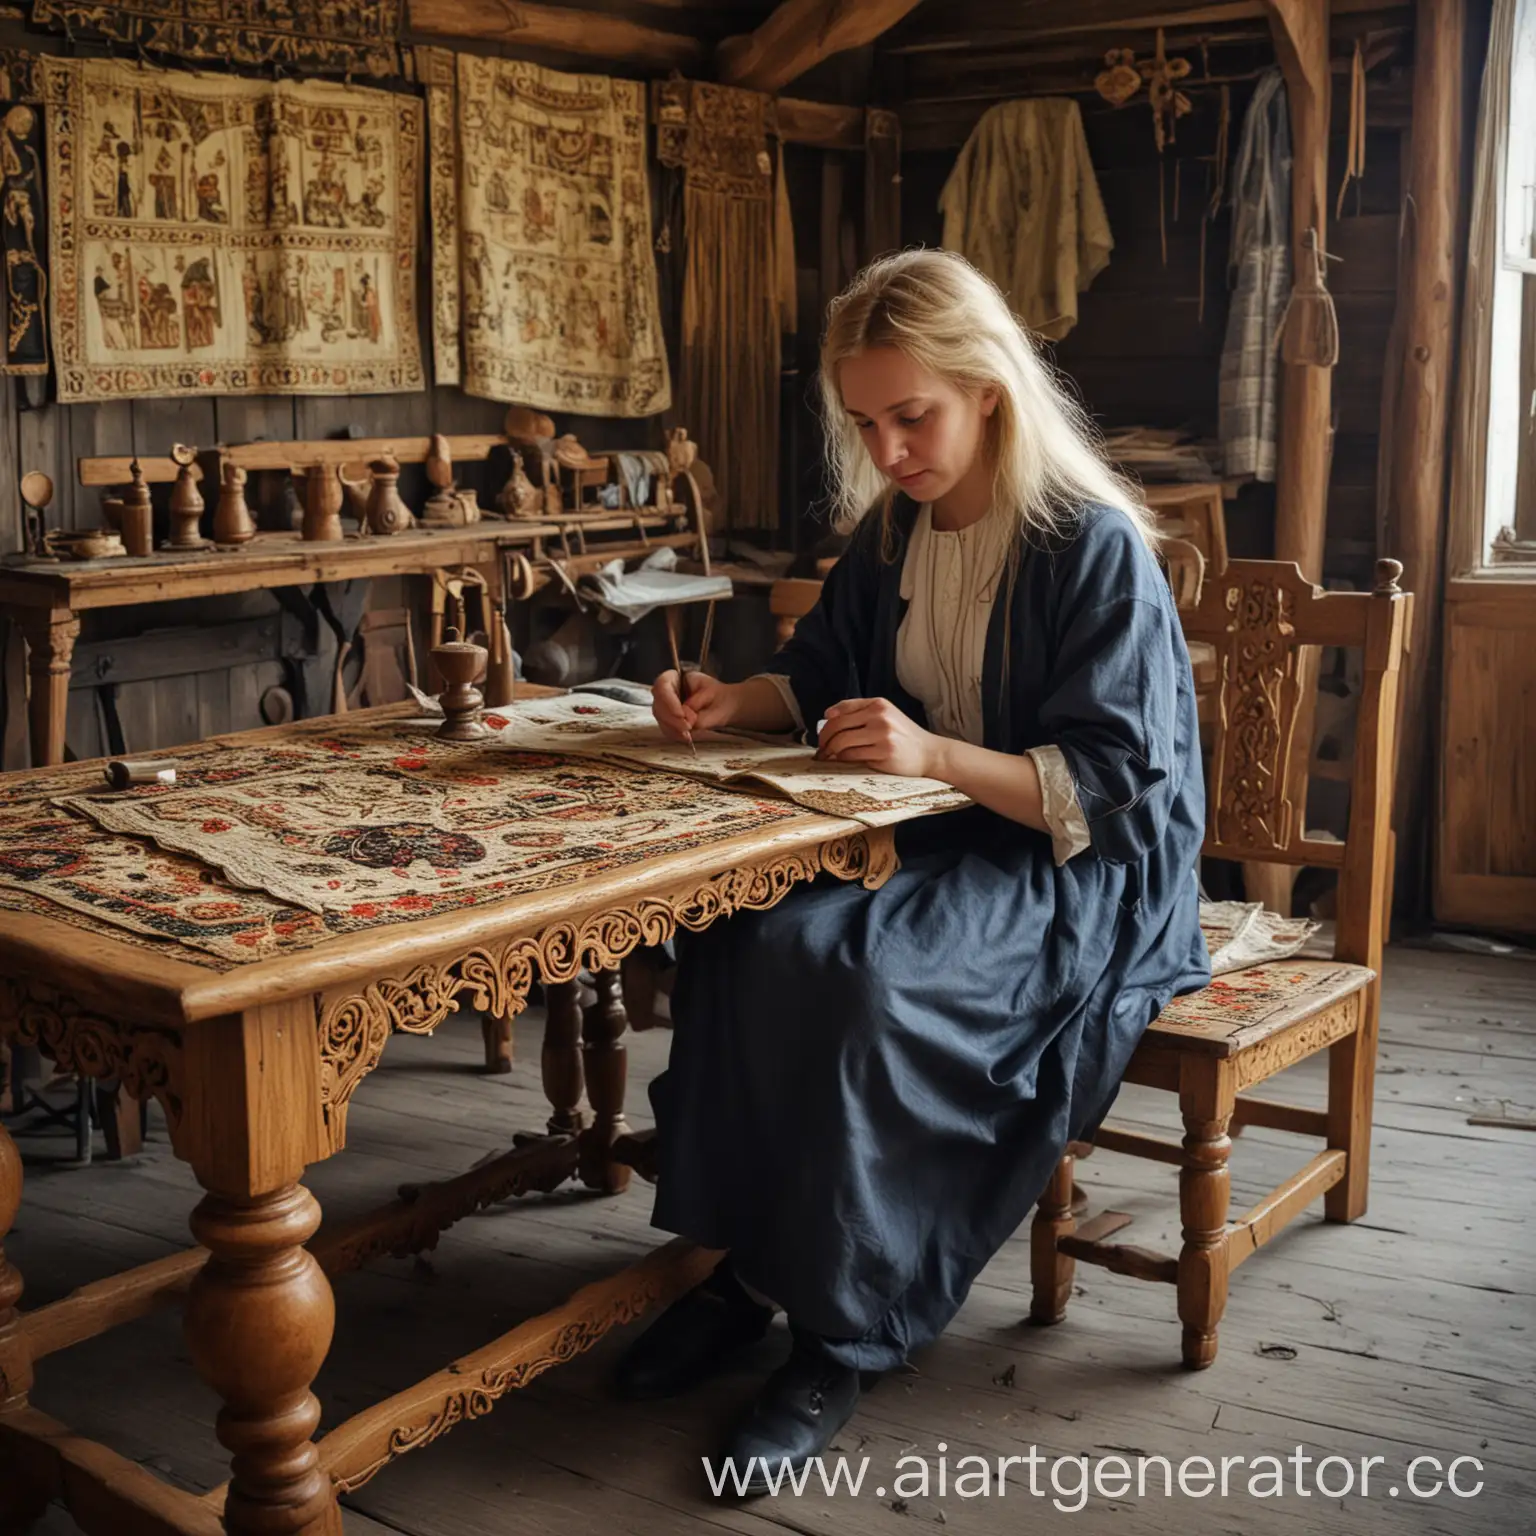 Masters-of-Woodwork-and-Sewing-in-City-of-Uglich